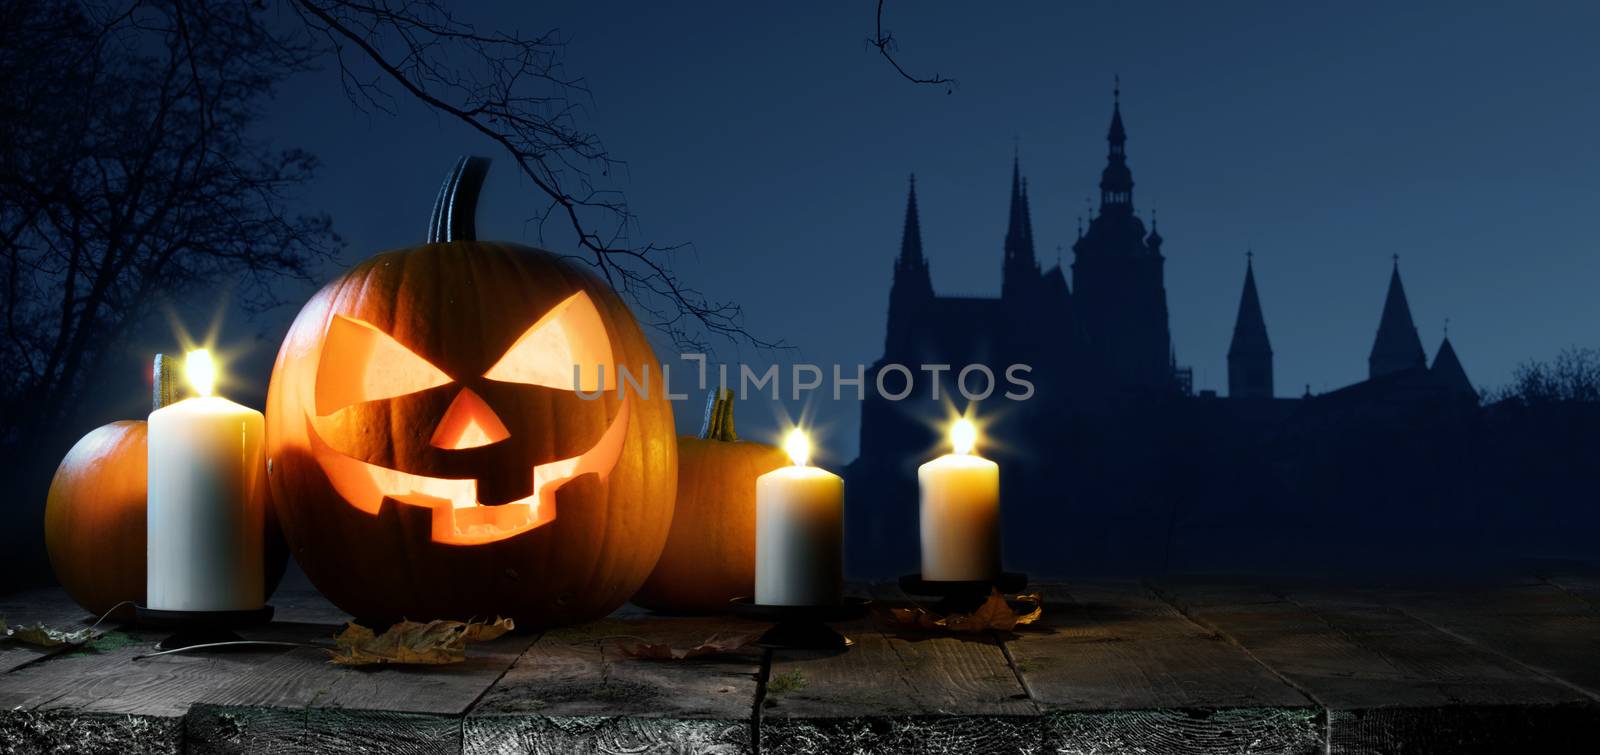 Halloween card with pumpkin and candles, gothic castle, trees and flying bats silhouette on background